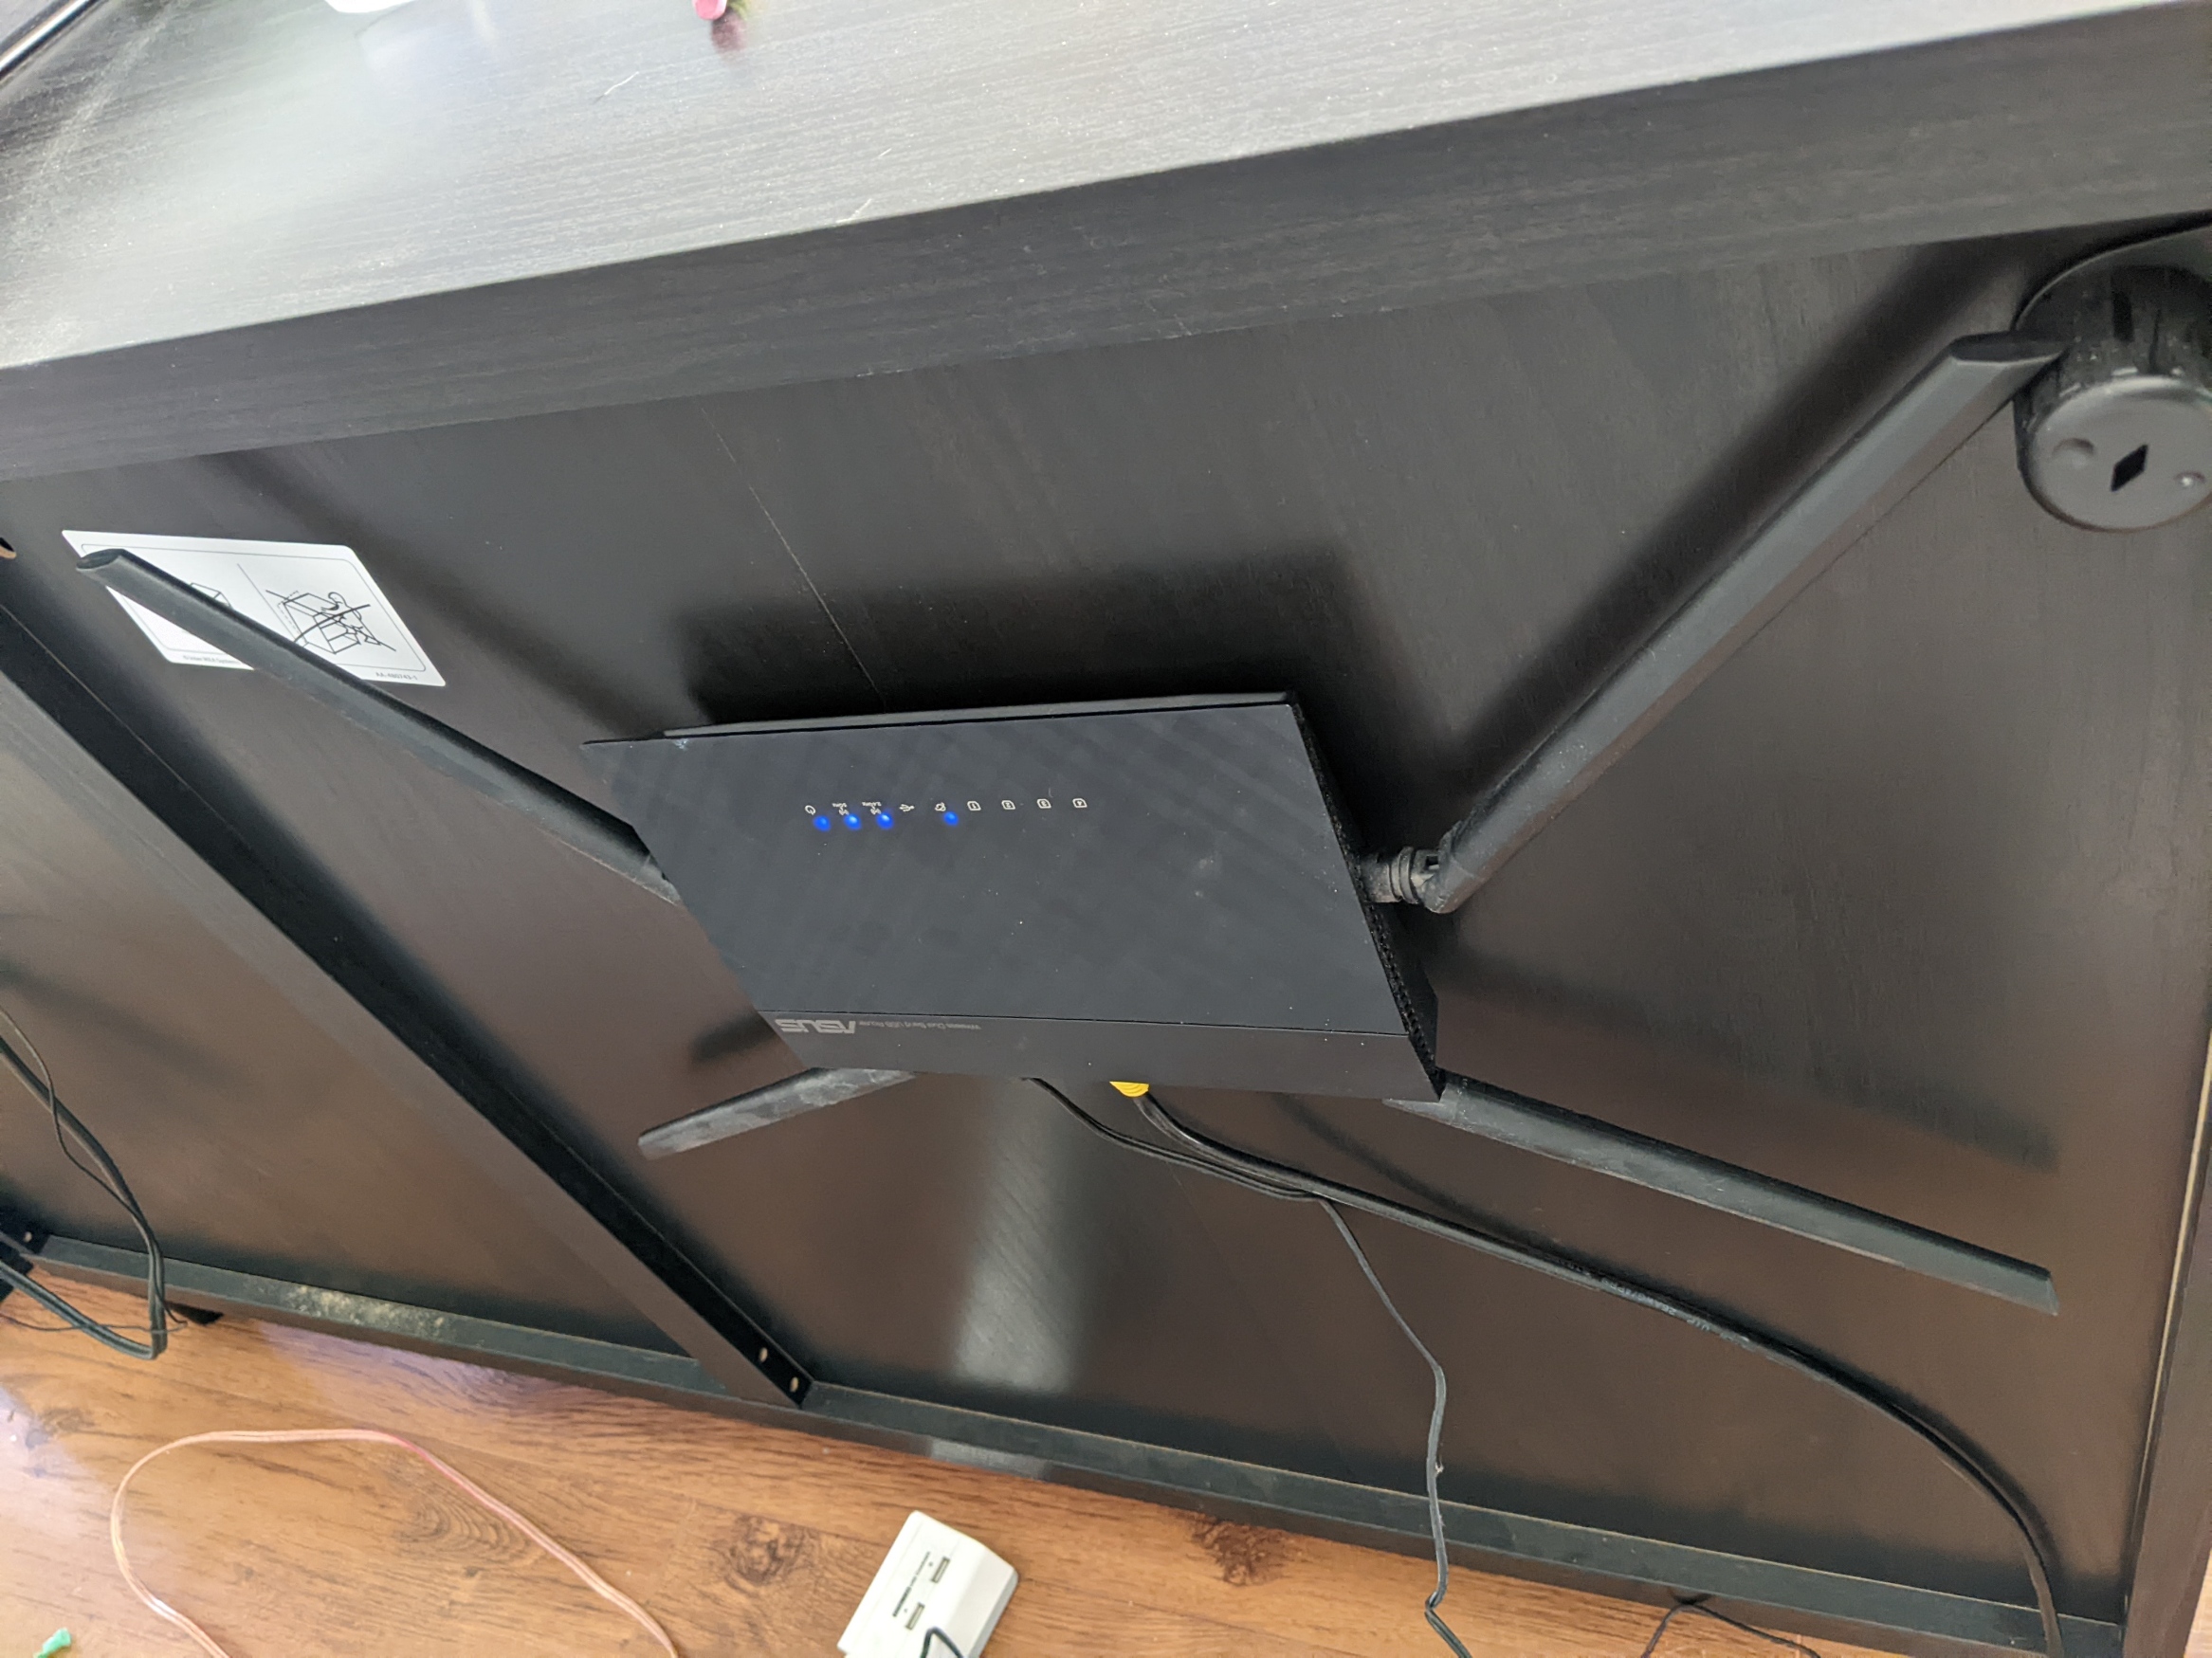 Asus RT-AC1200 Router Mount